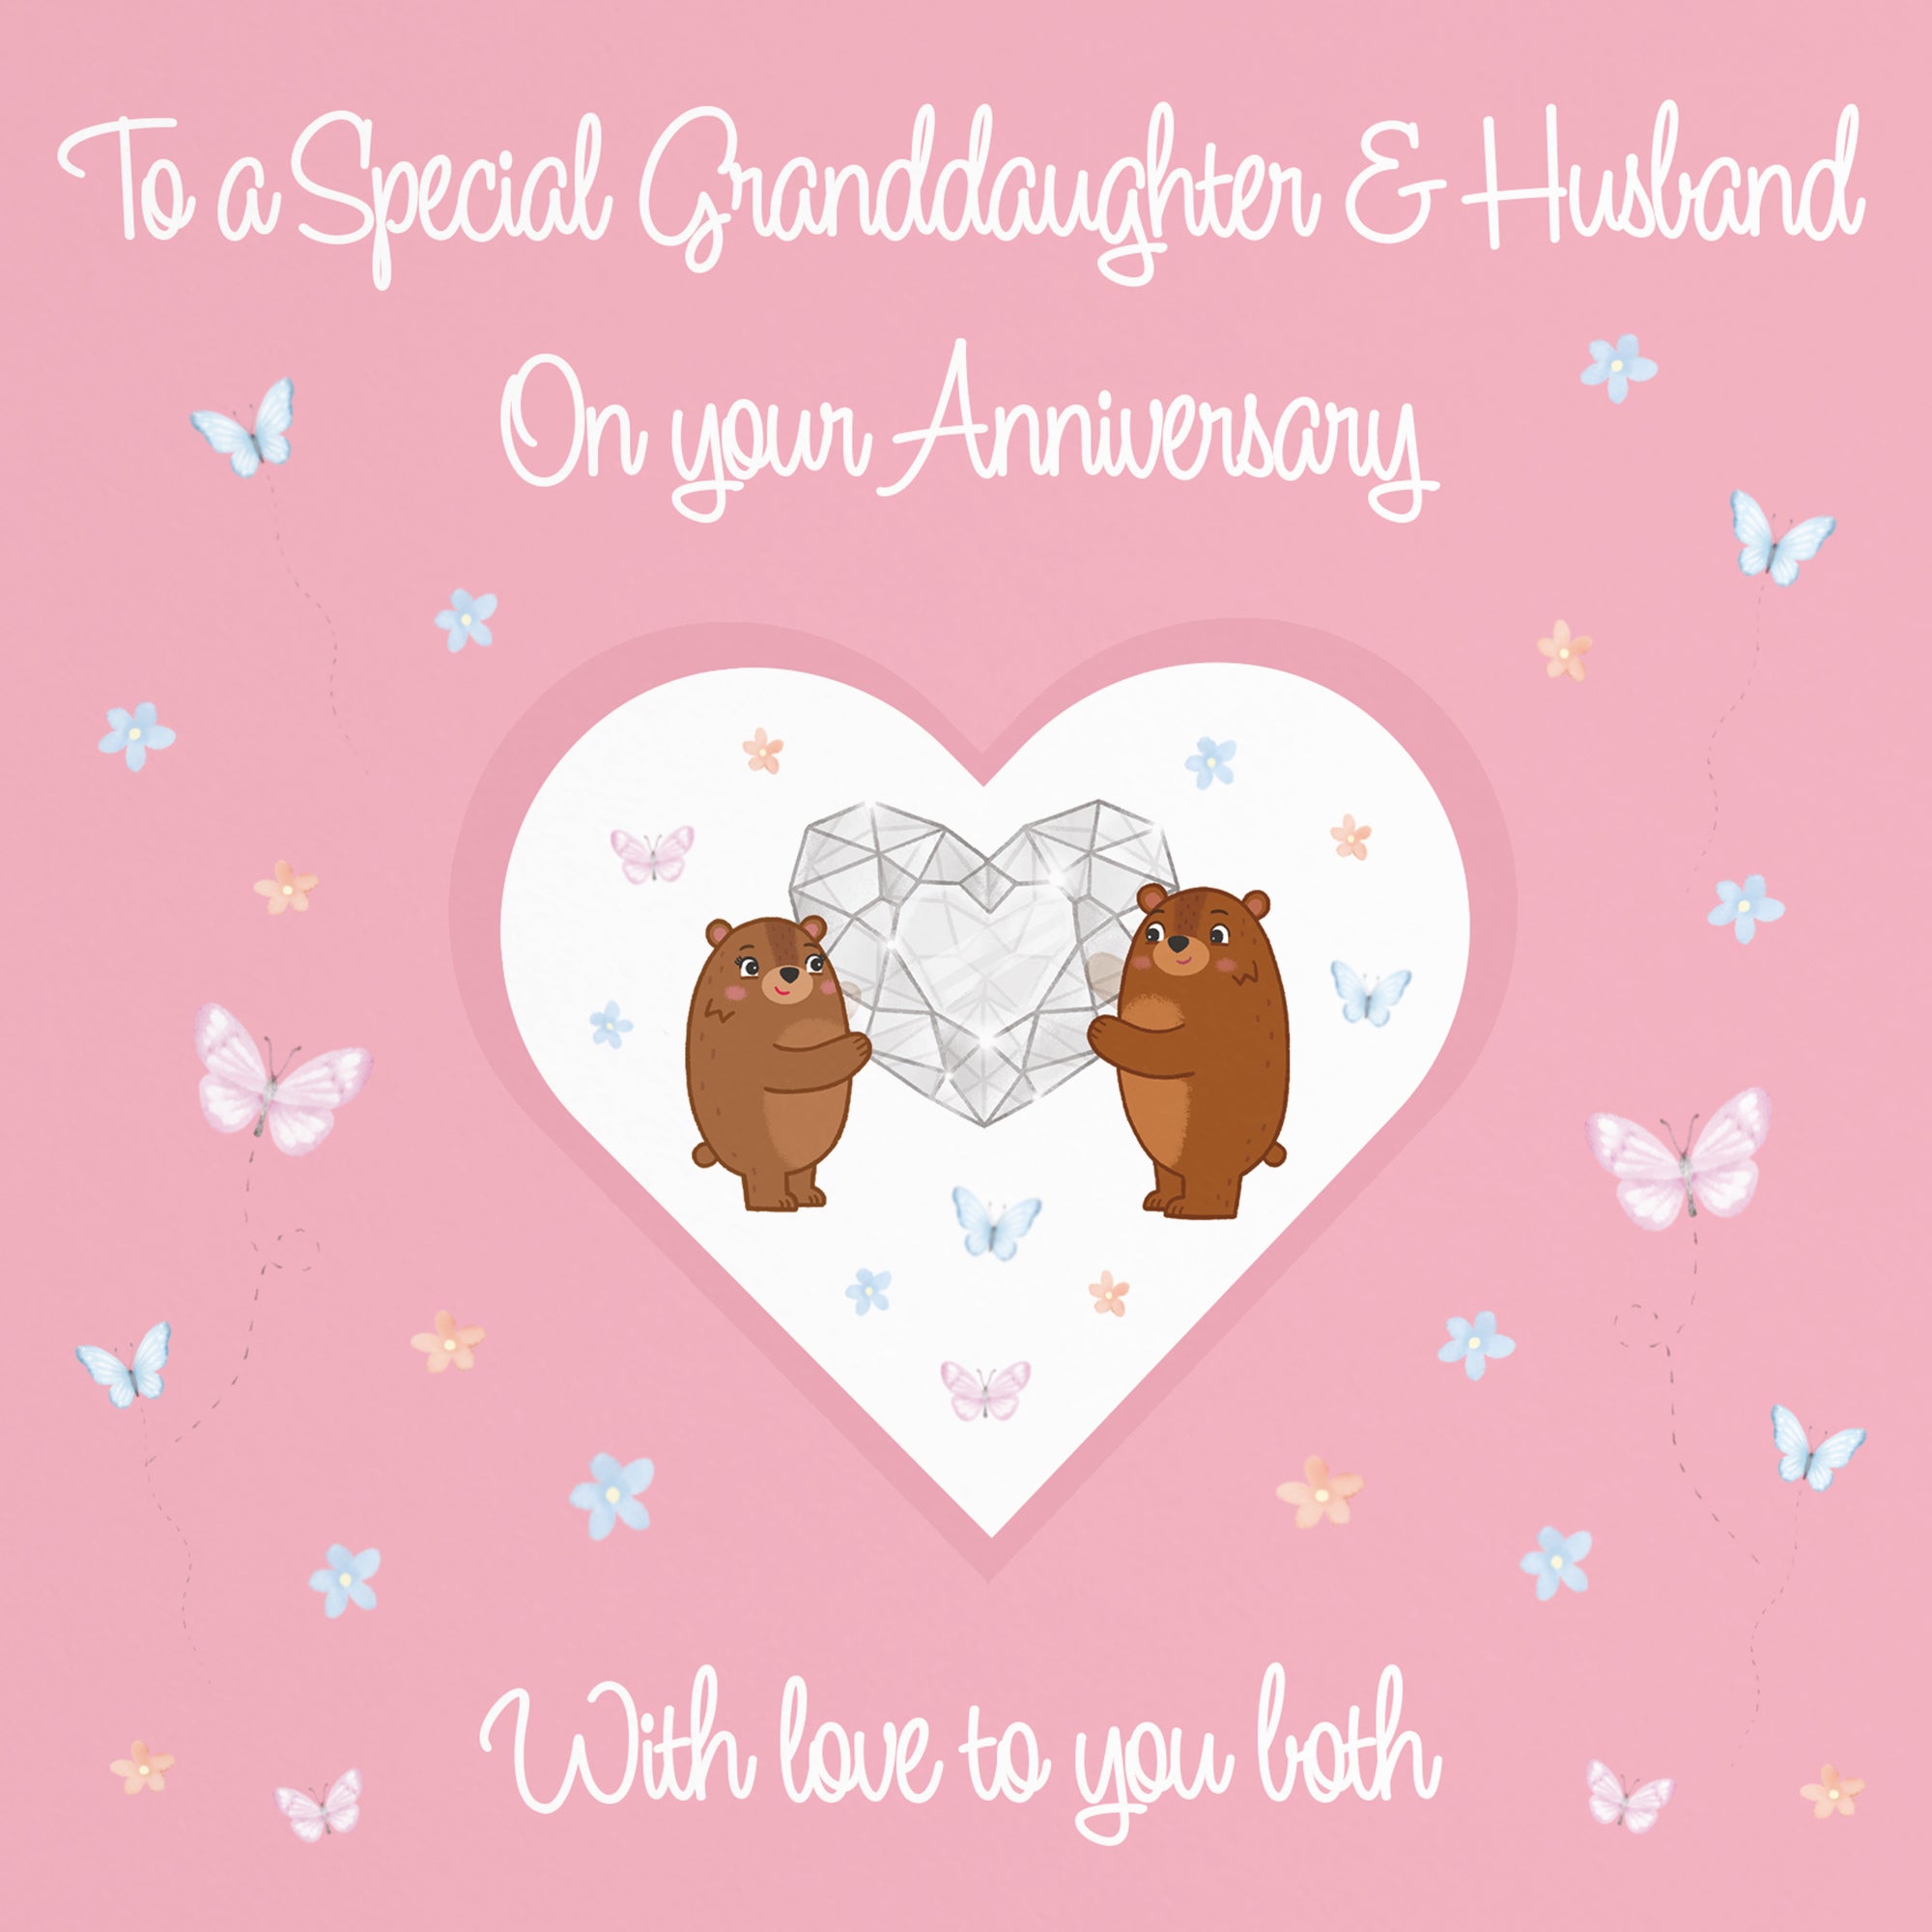 Granddaughter And Husband Anniversary Card Romantic Meadows